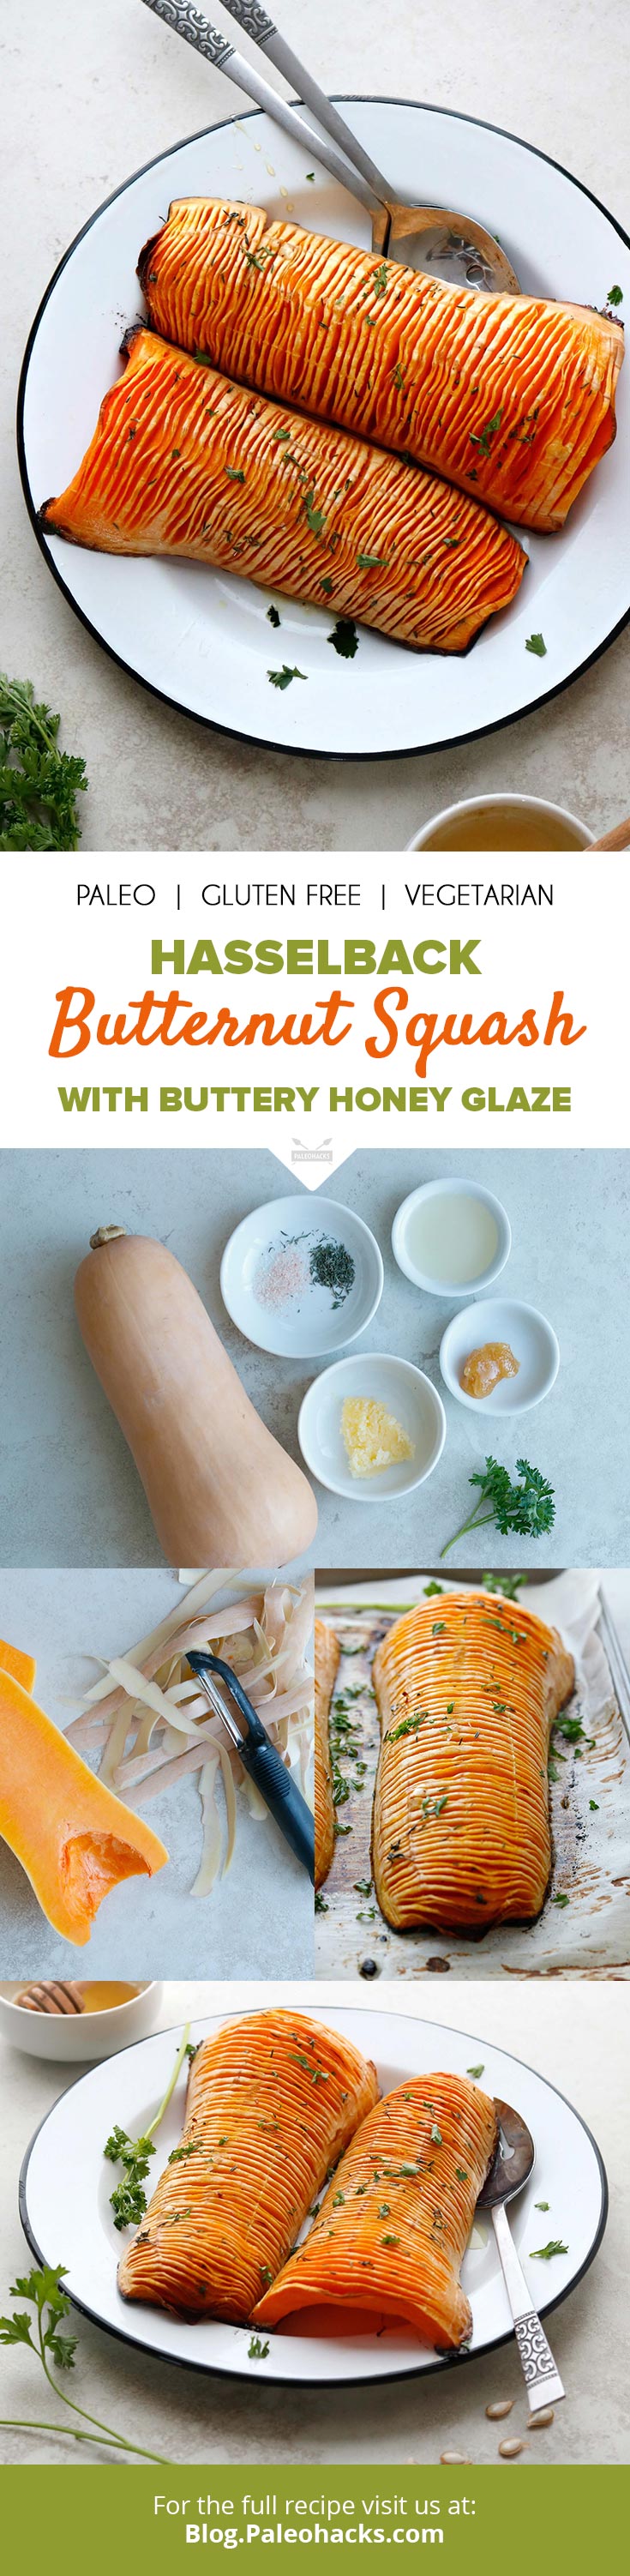 Slice butternut squash and glaze with a buttery honey sauce for a savory dish that will have everyone asking for seconds.